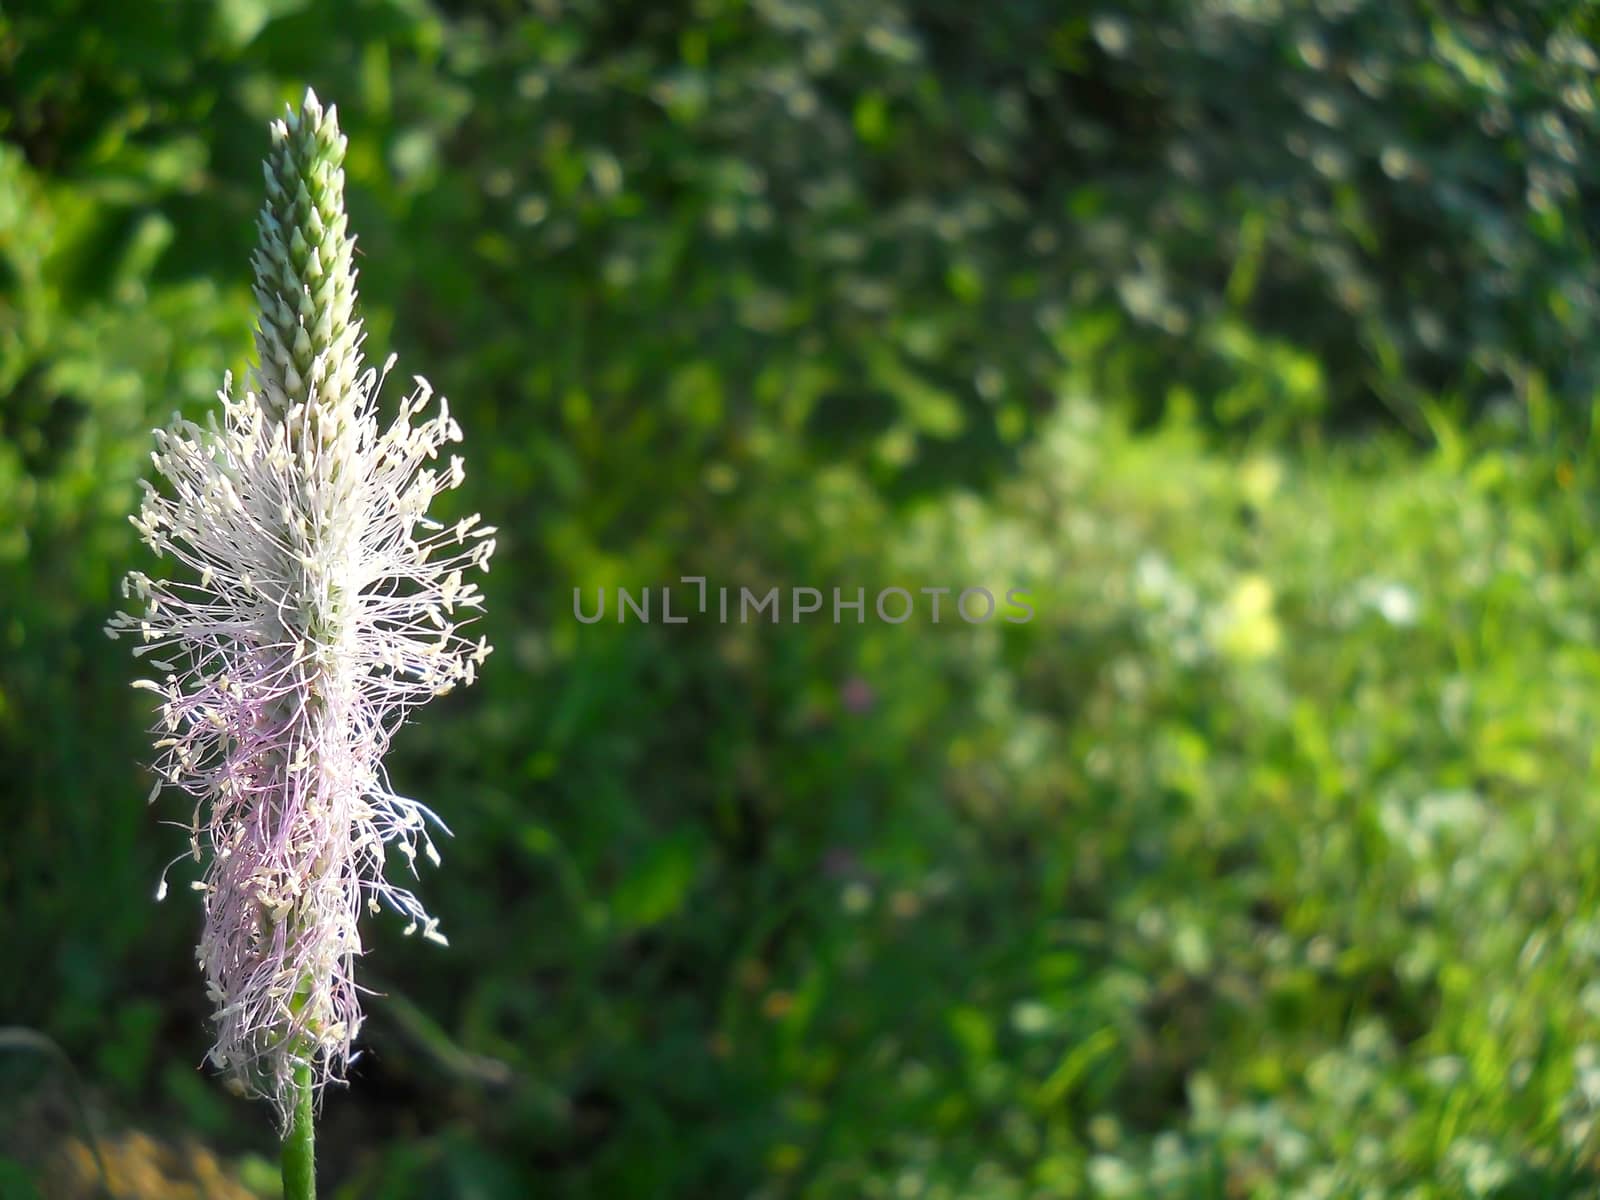 lilac wildflower by fadeinphotography